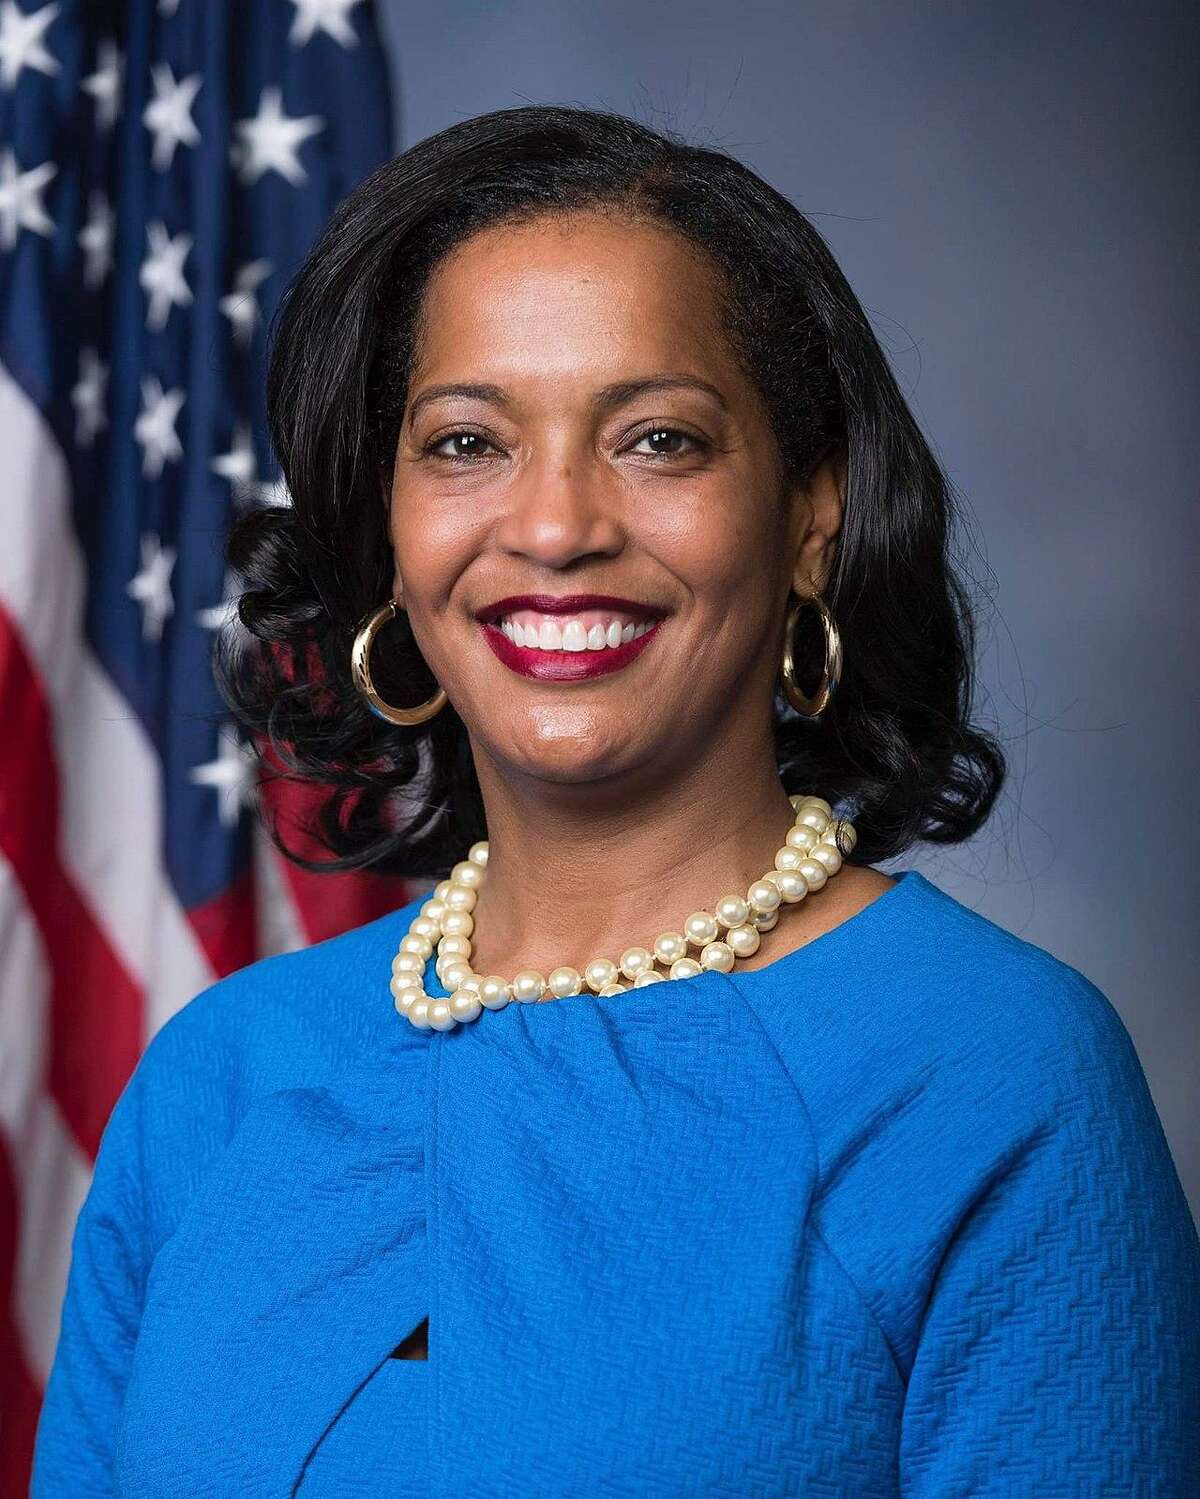 Congresswoman Jahana Hayes, D-5th, will deliver the commencement address at Middlesex Community College in Middletown May 30 at 6 p.m.